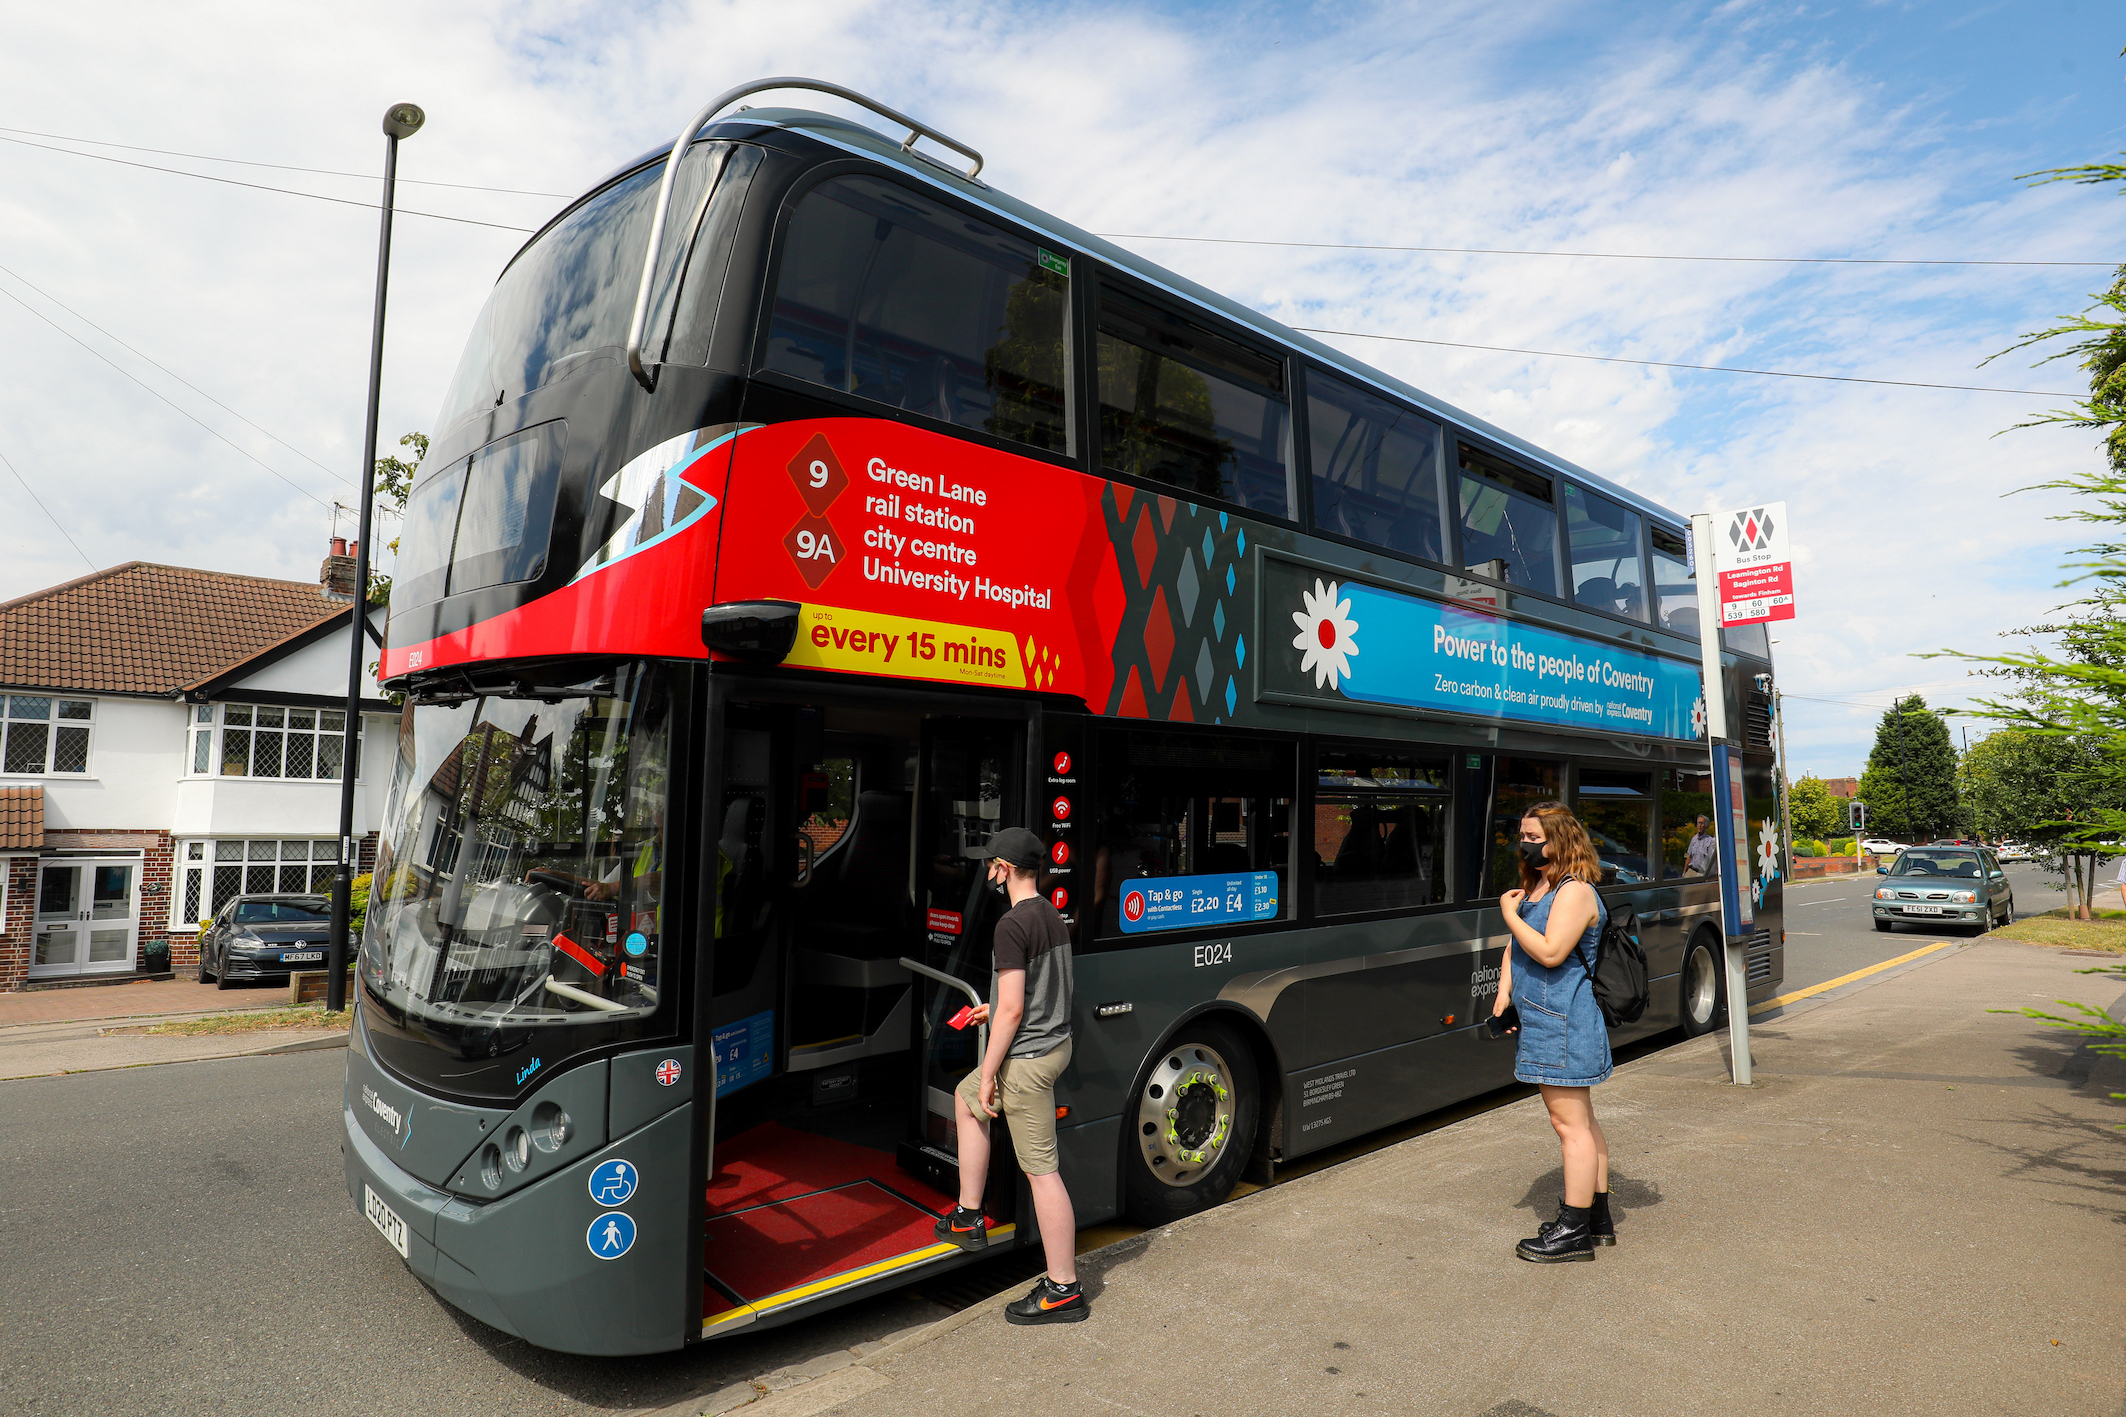 Electric bus in Coventry. Photo credit: National Express West Midlands